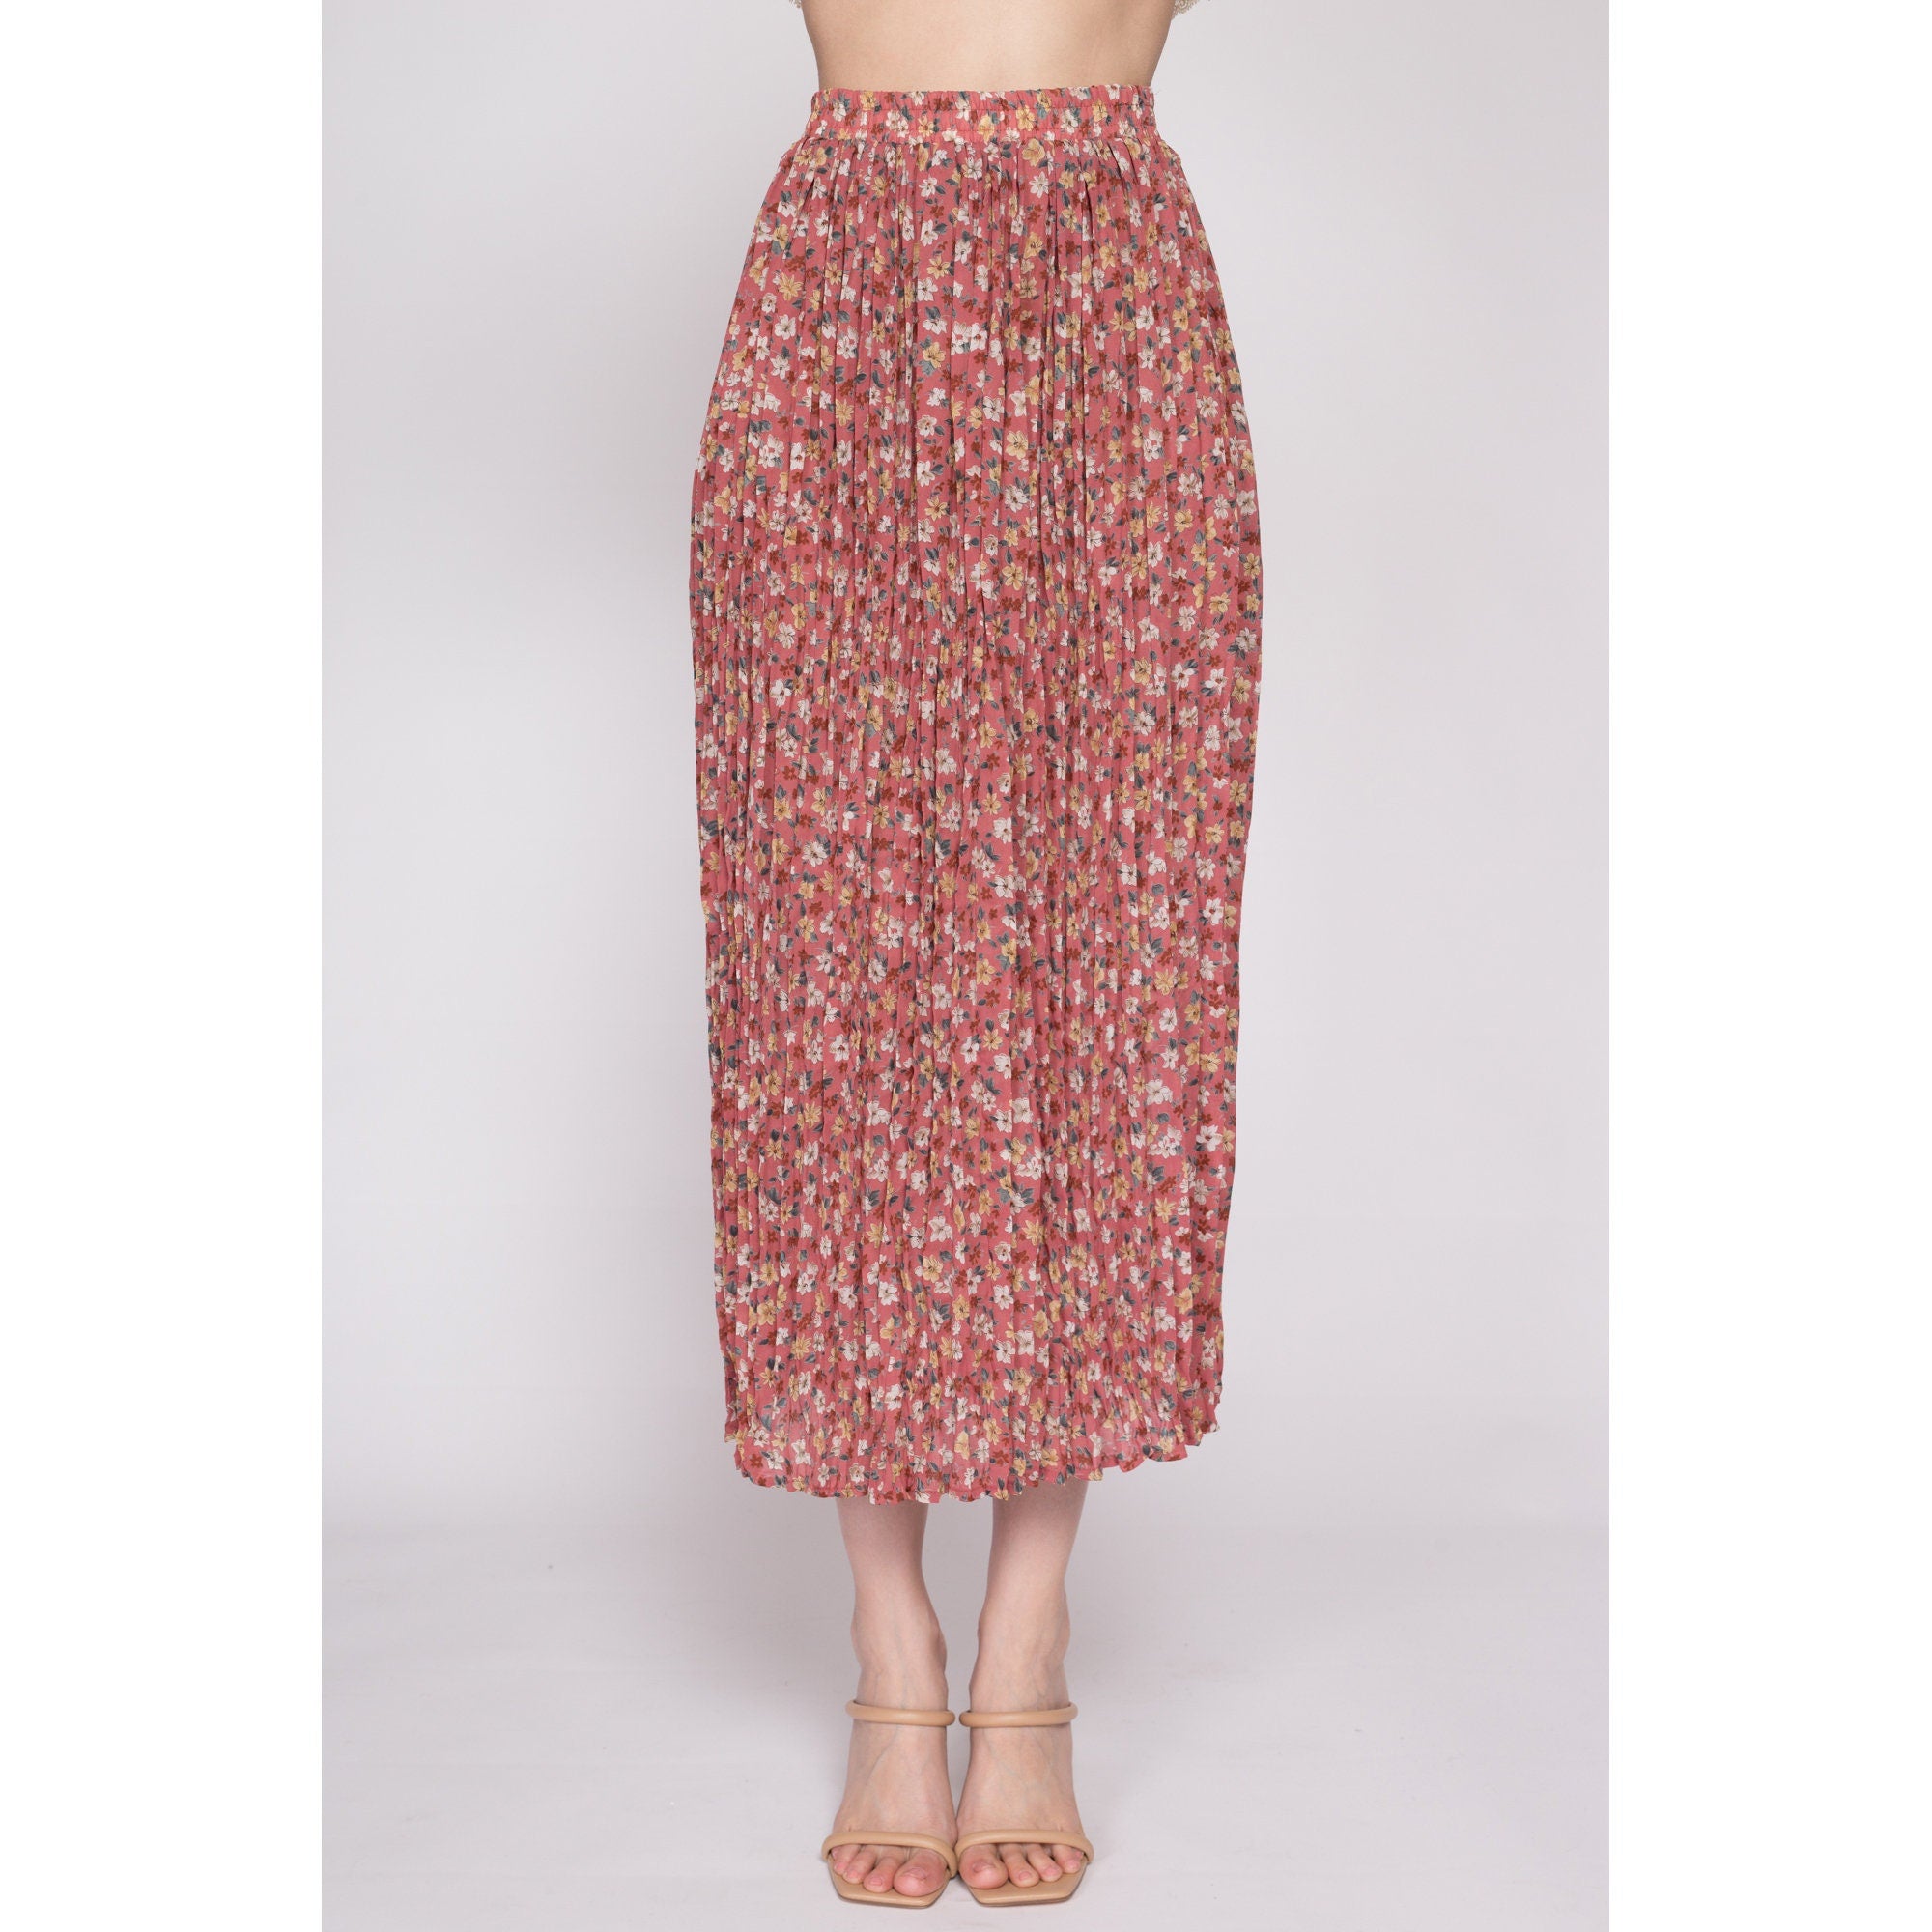 90s Pink Floral Crinkle Pleated Midi Skirt - Small – Flying Apple 